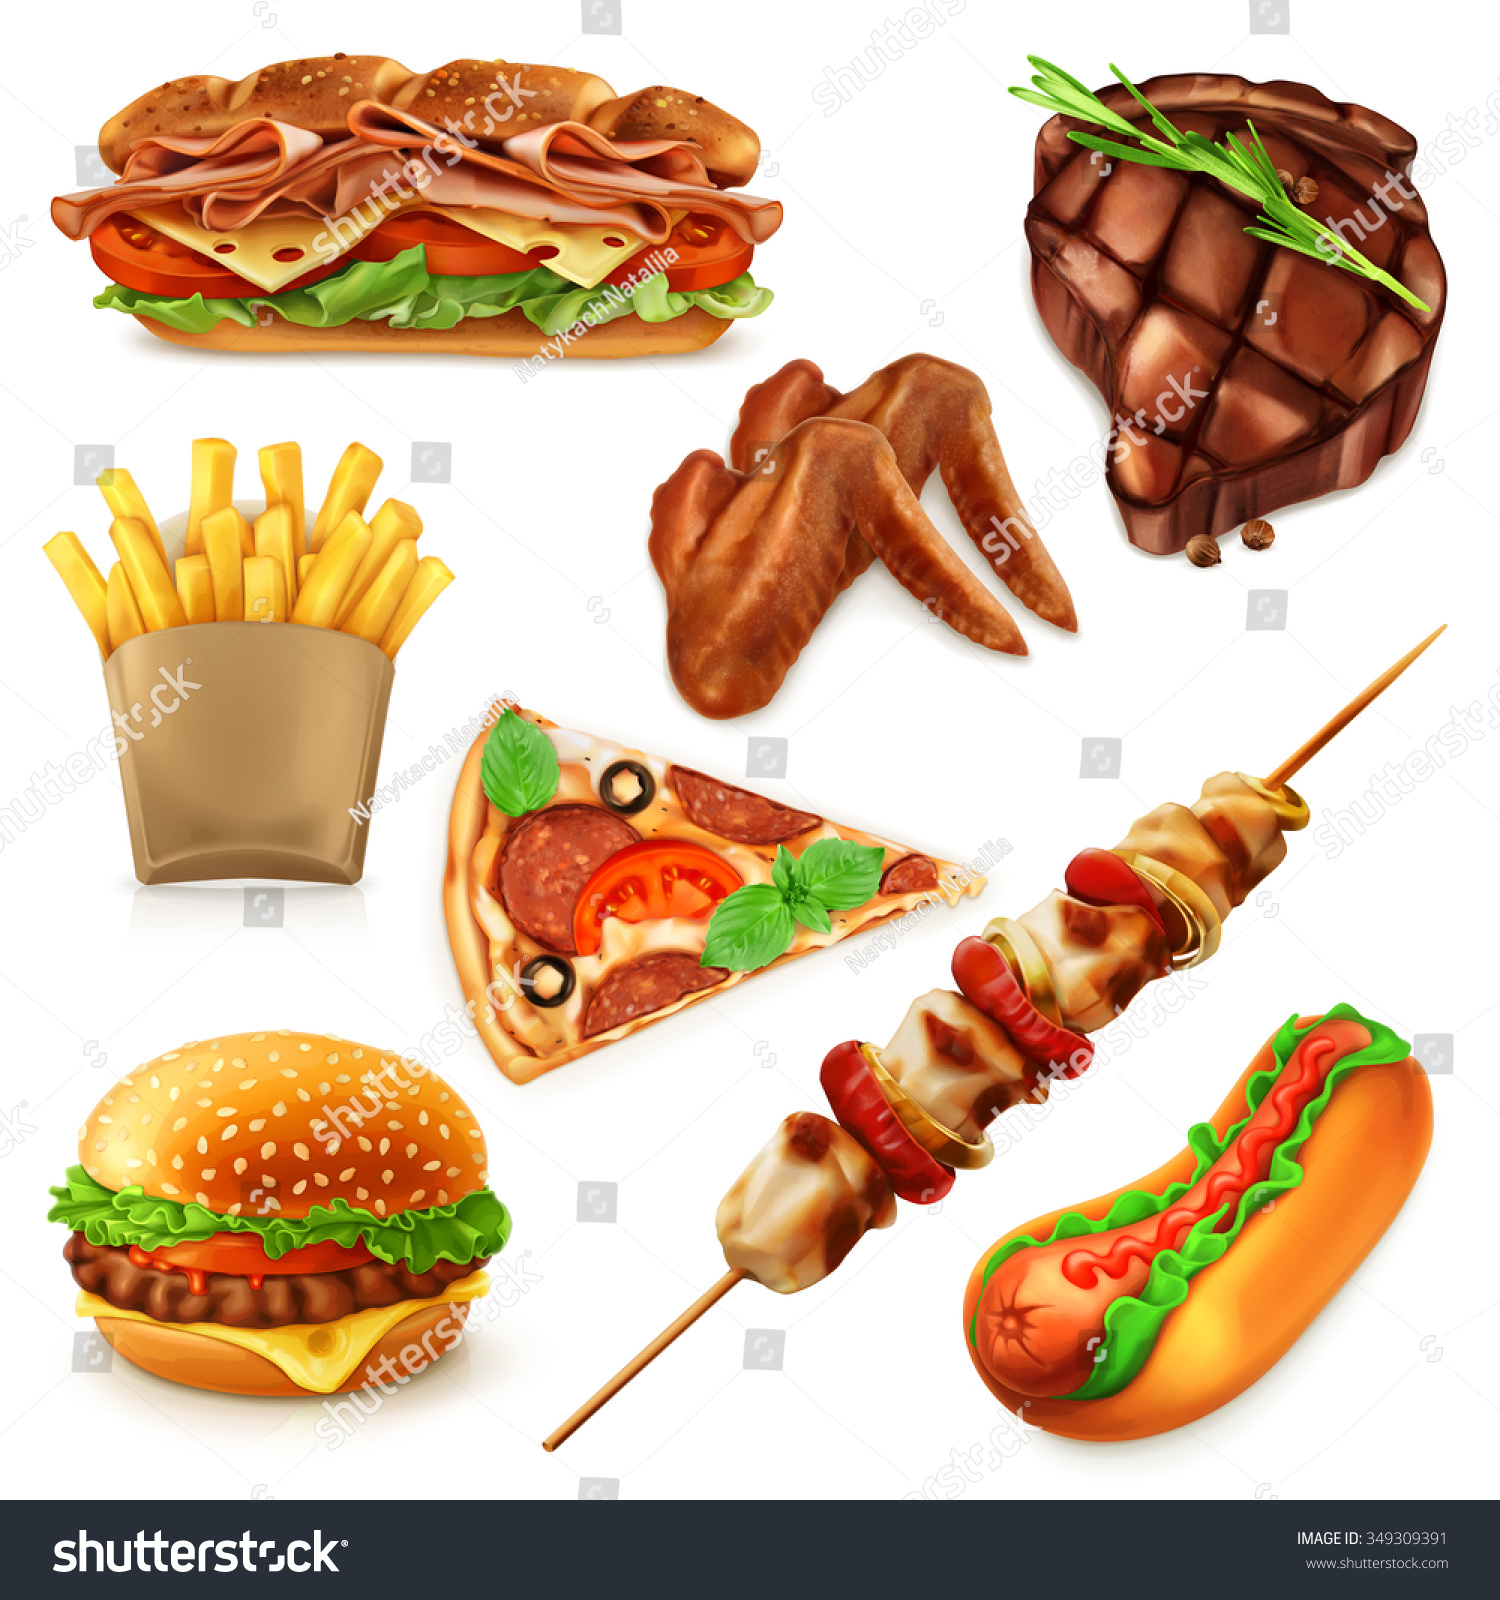 Fast Food Set Vector Icons - 349309391 : Shutterstock